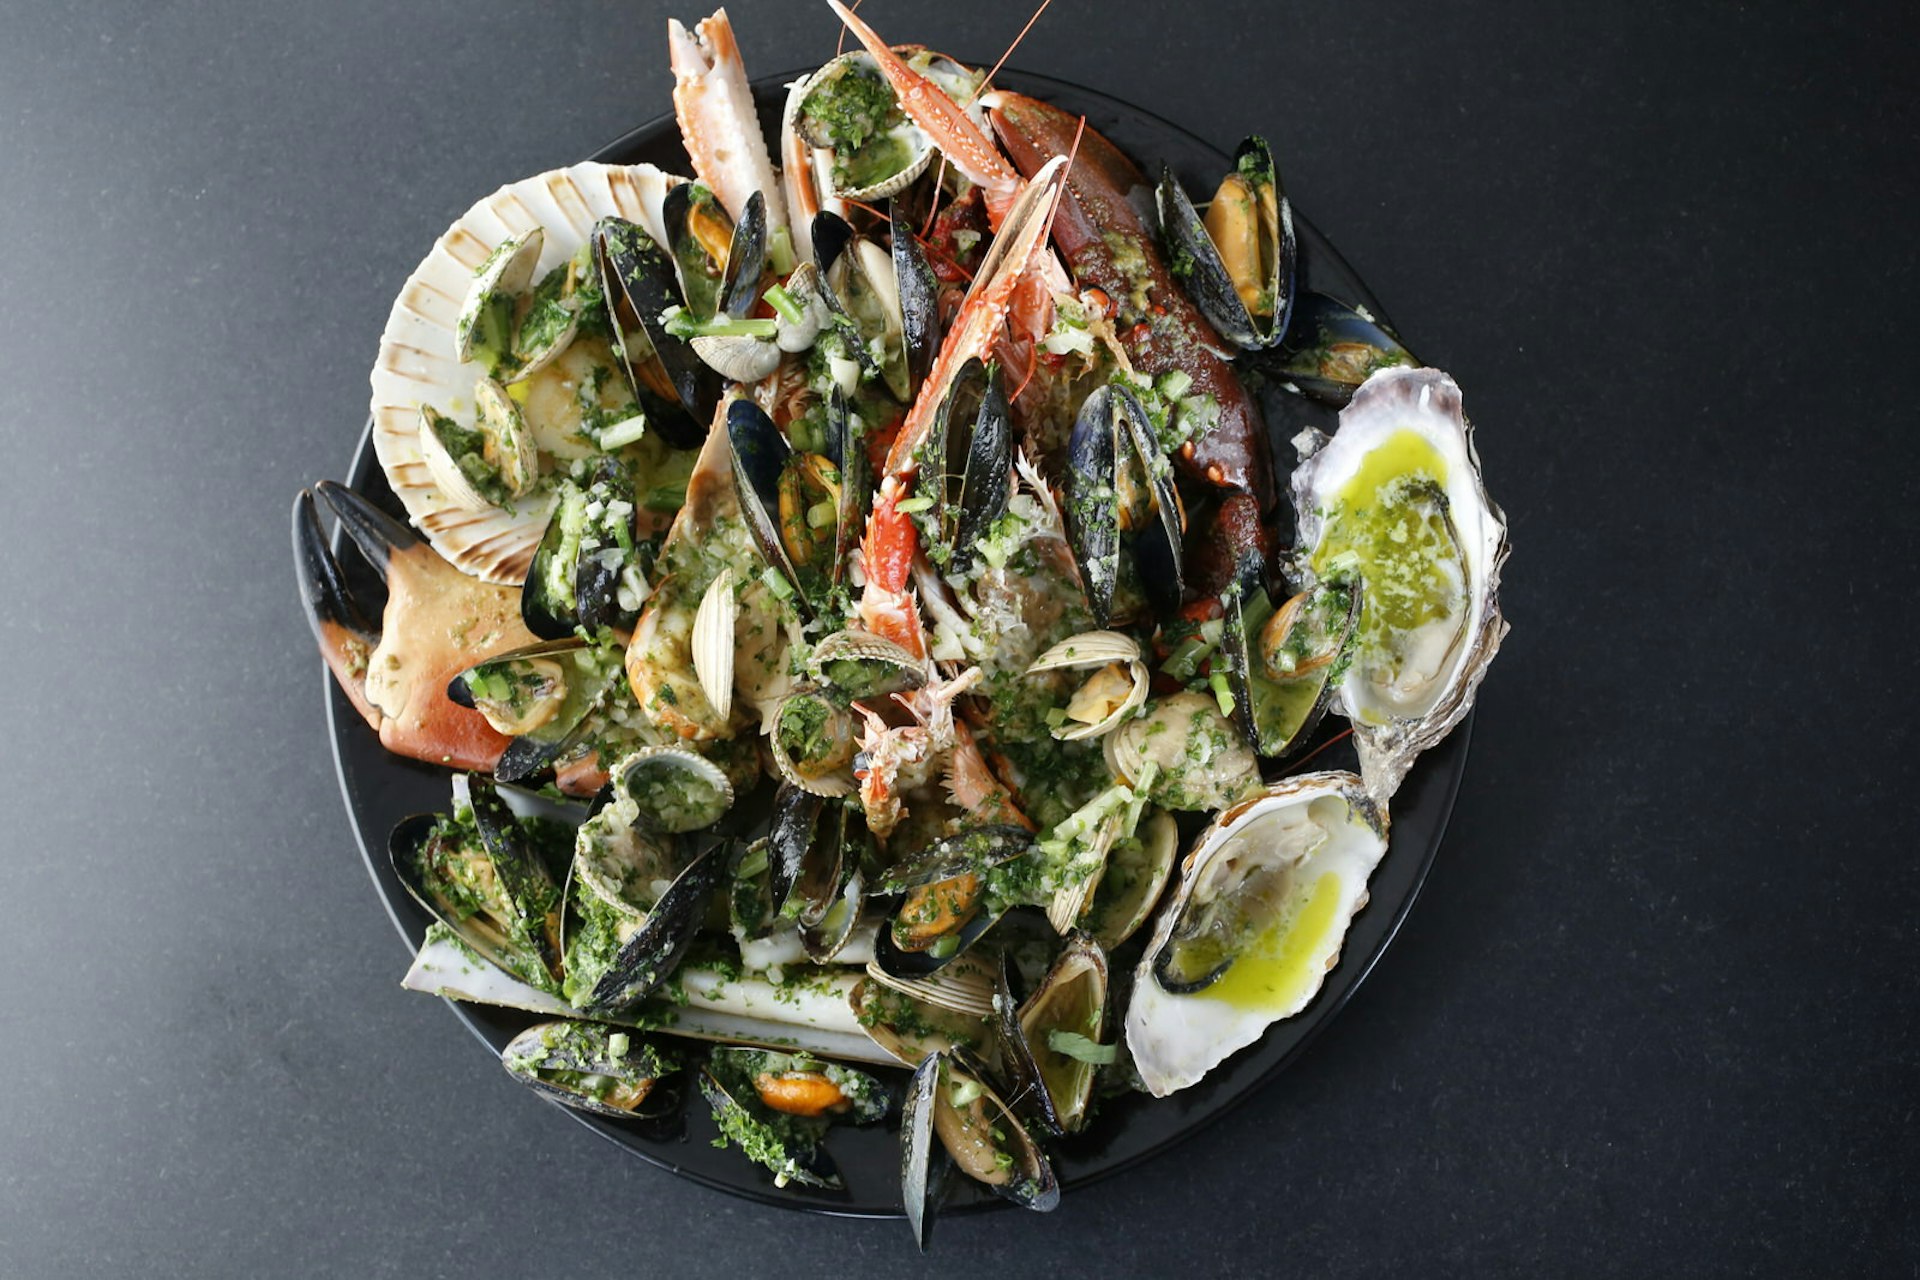 A black plate on a black table stuffed with fresh seafood, served at Ondine restaurant in Edinburgh. The plate features oysters, lobster, mussels, clams, scallops and crab.